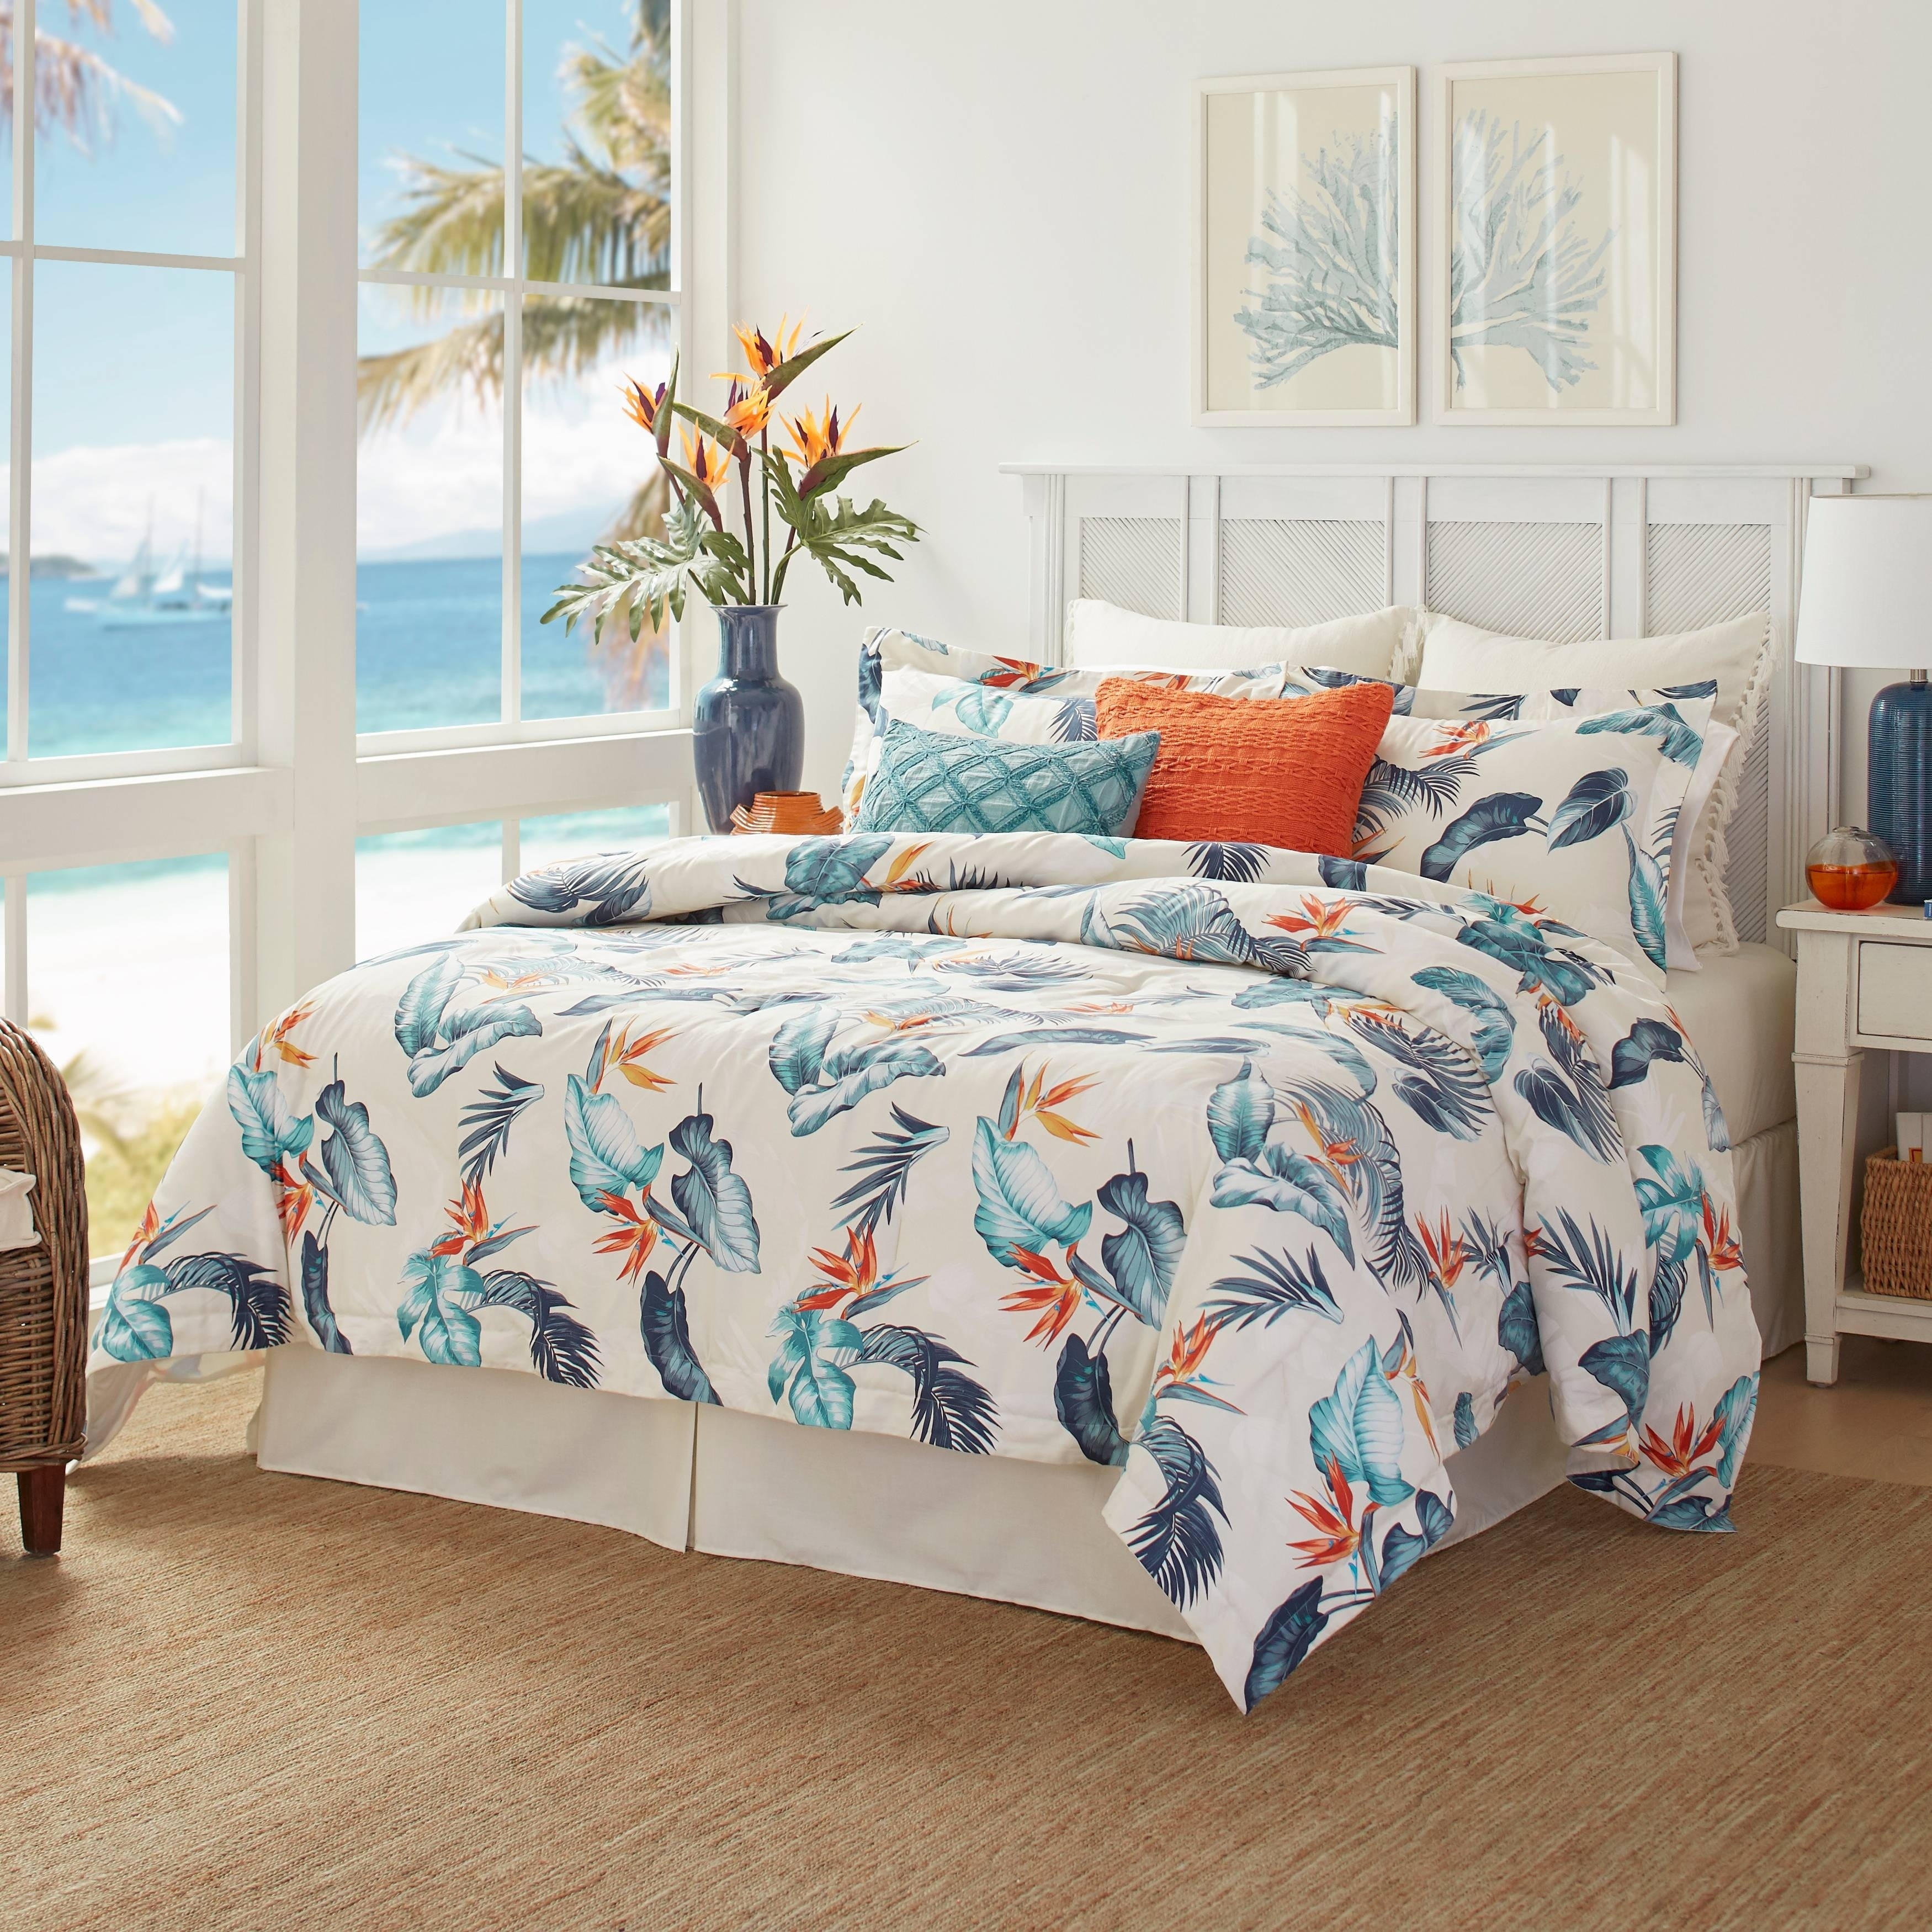 tommy bahama comforter sets queen size